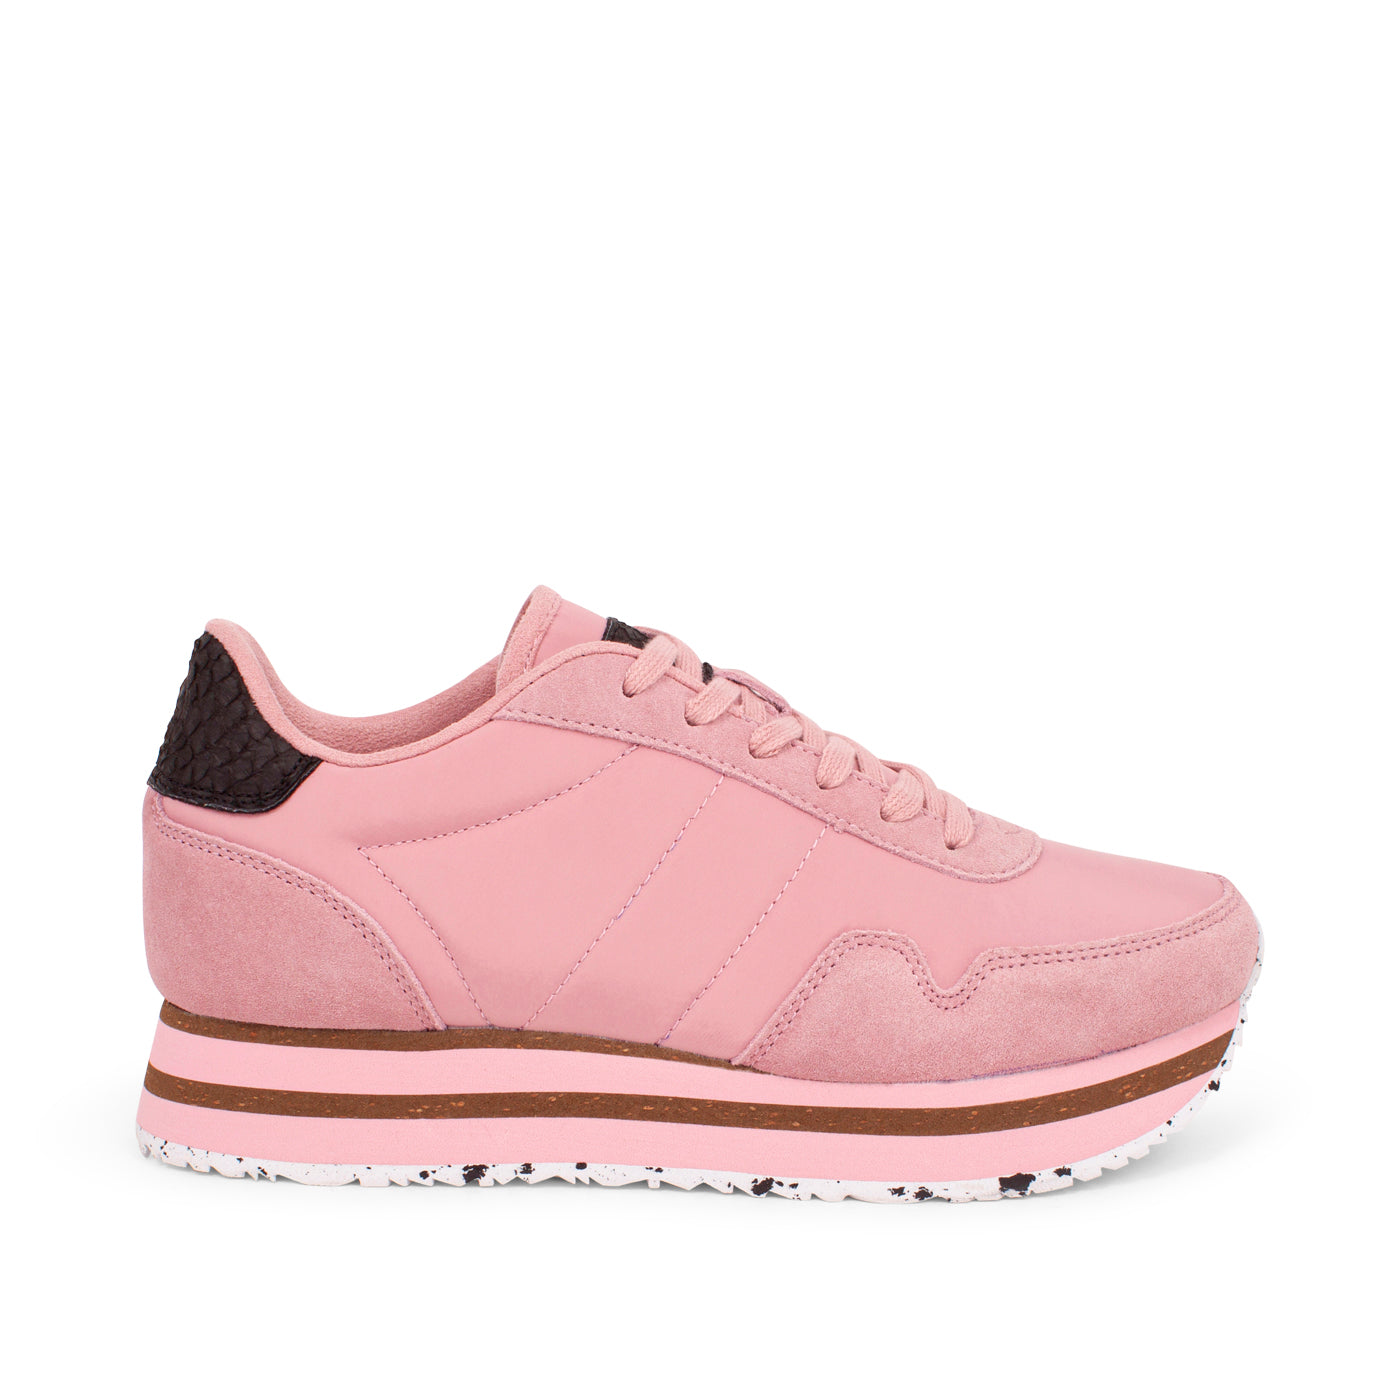 WODEN Nora III Plateau Sneakers 761 Soft Pink